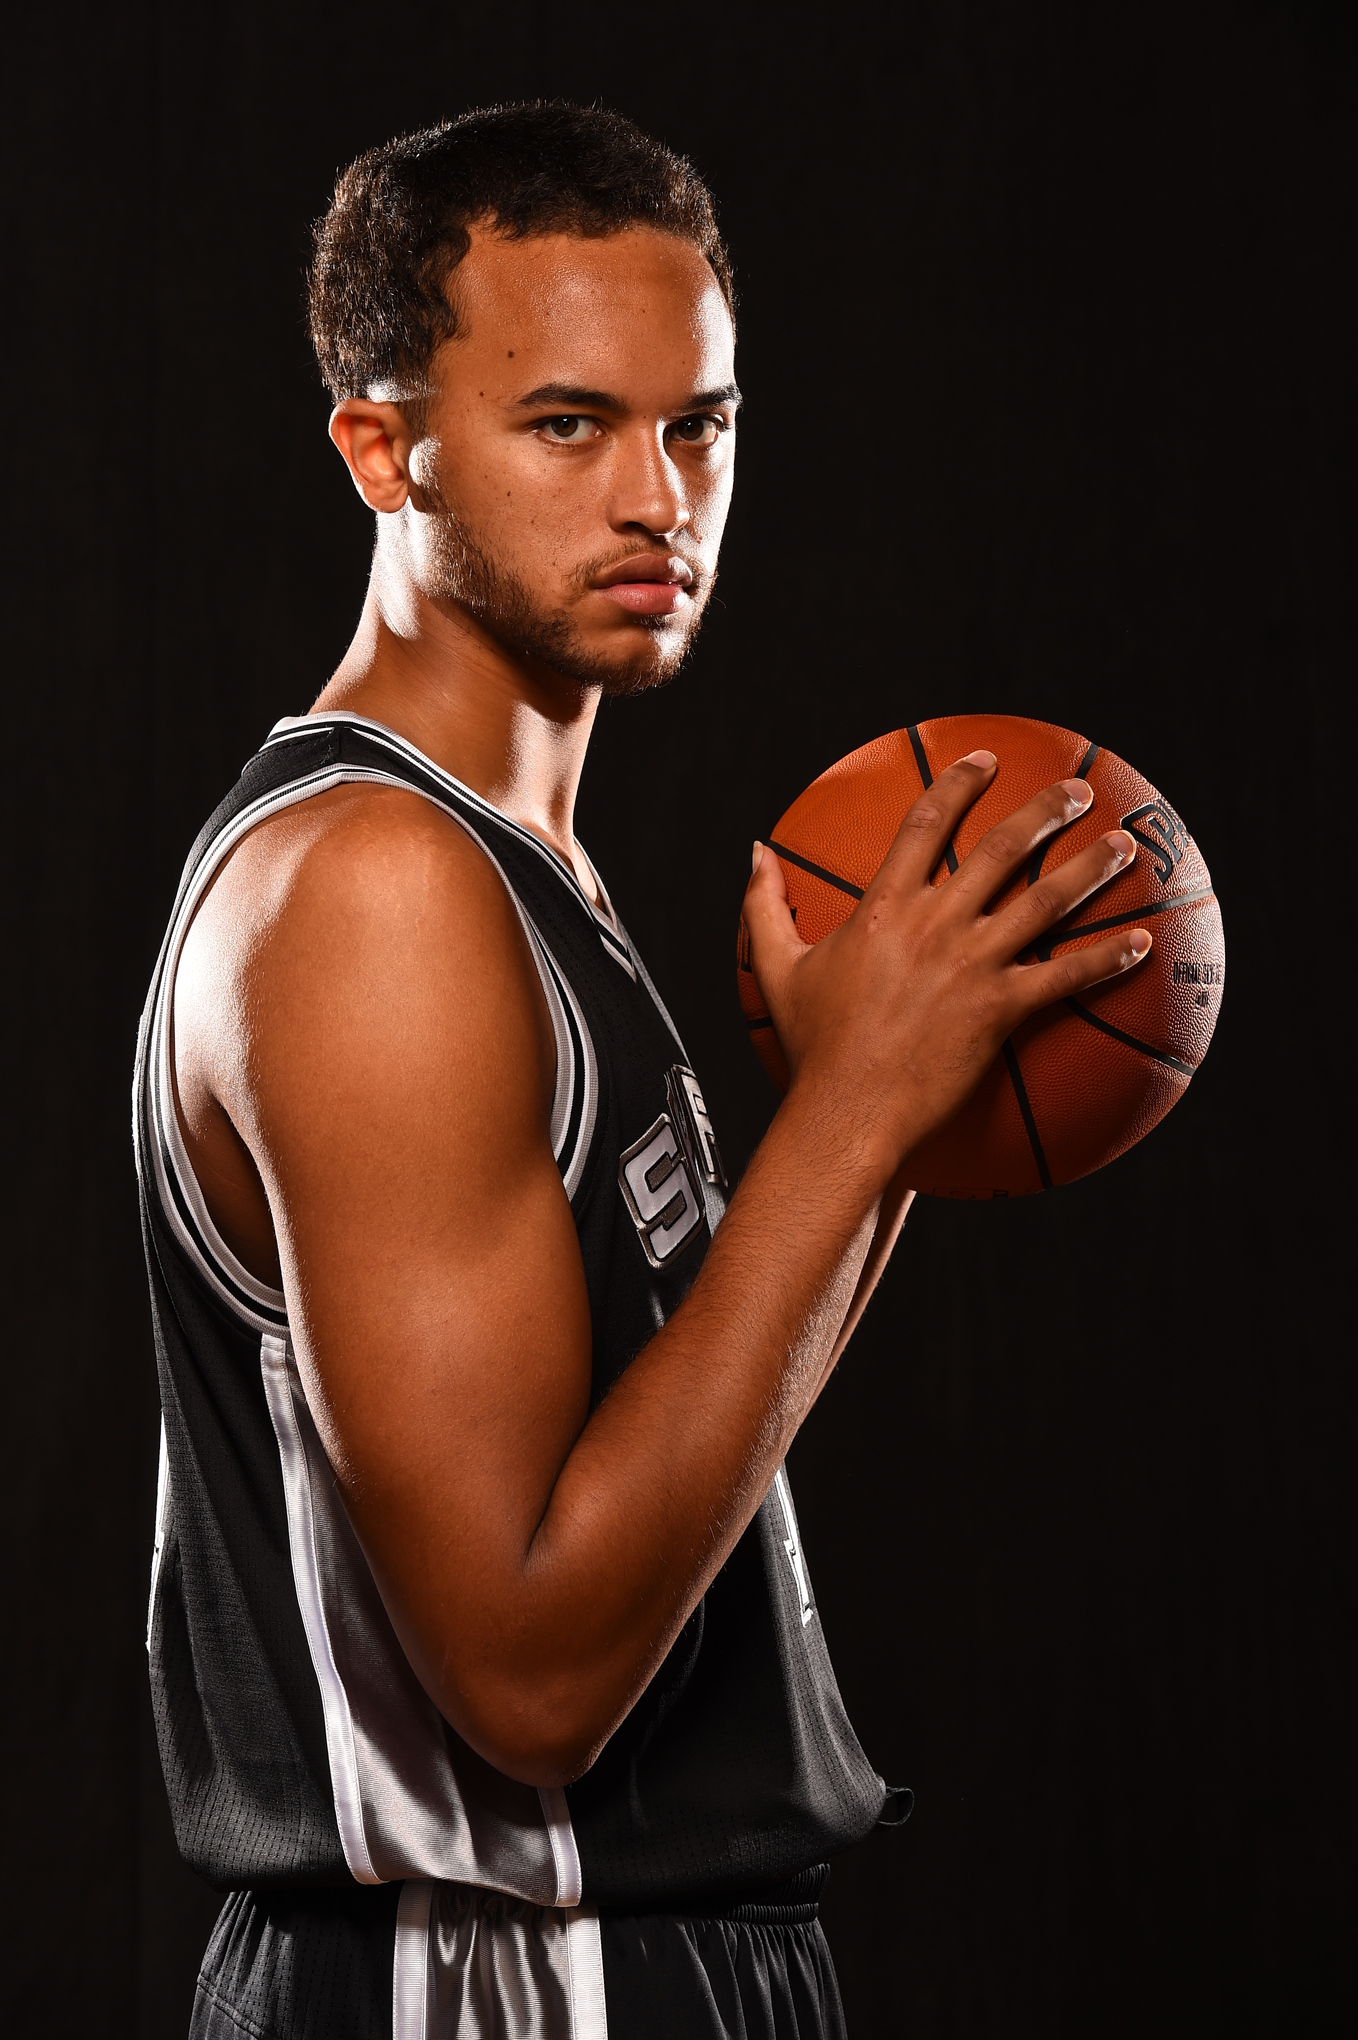 Kyle-anderson-nba-rookie-day-6